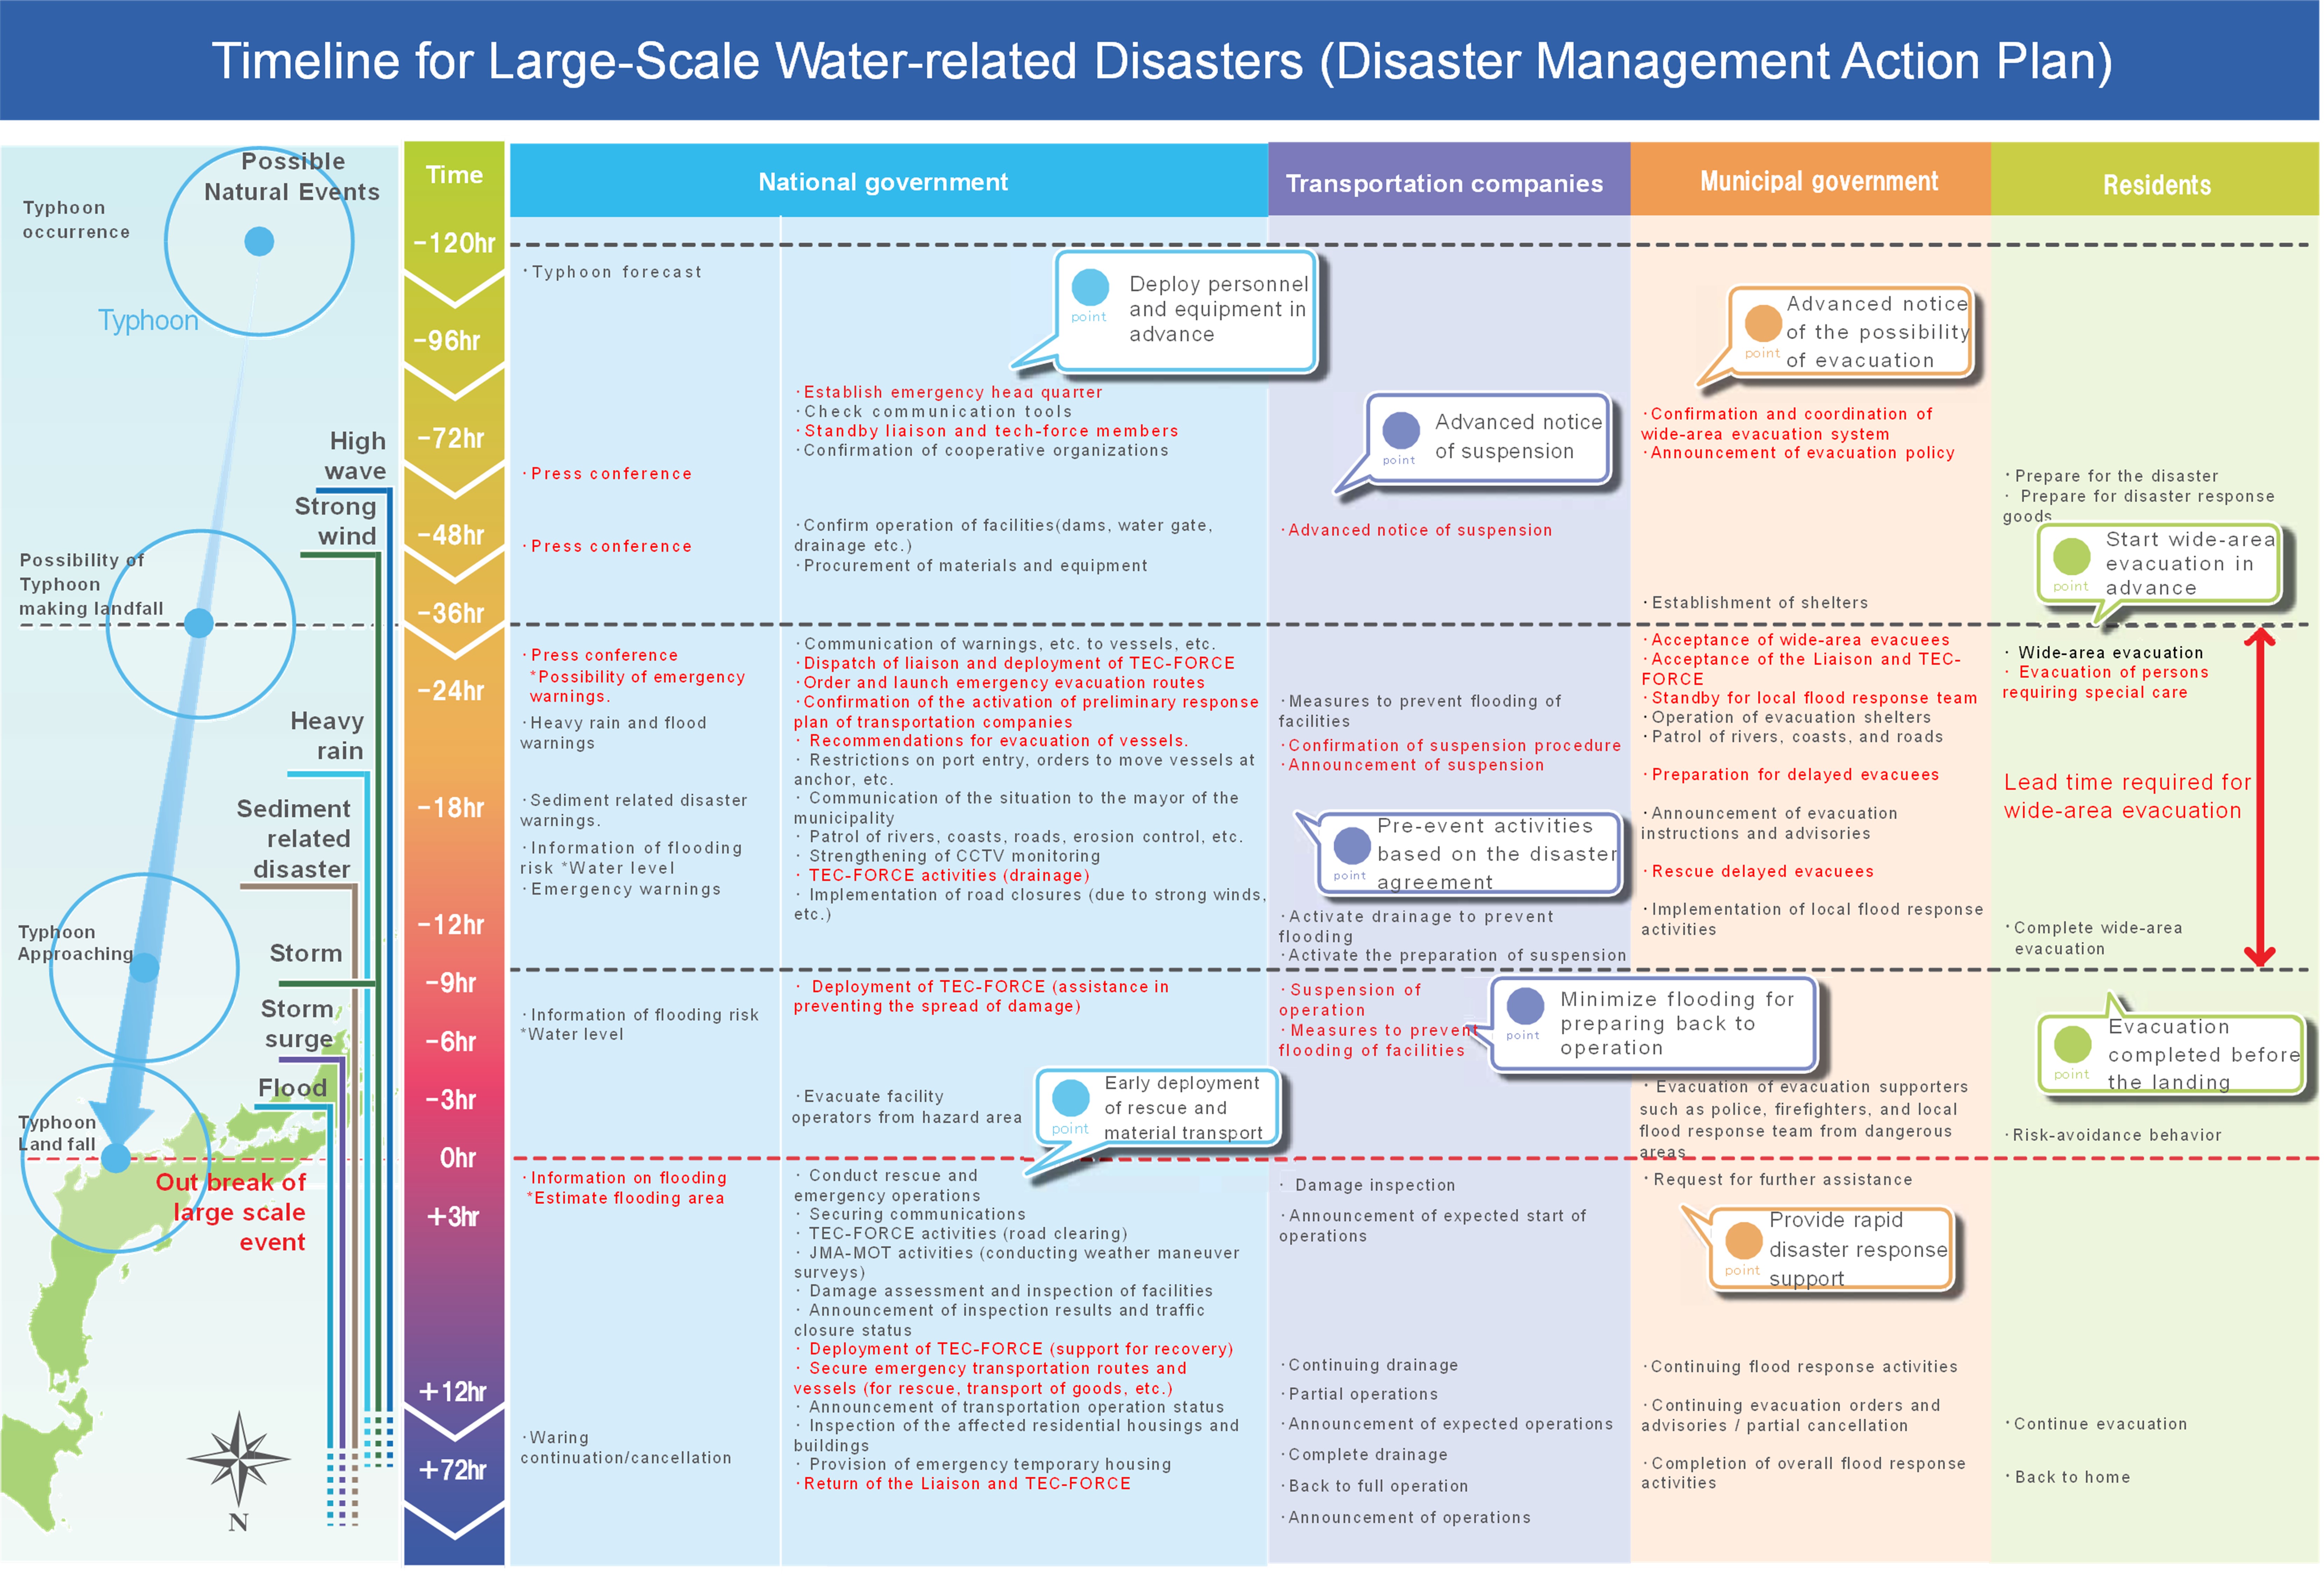 Figure 3.2.2.3. Example of the timeline for large scale water-related disasters